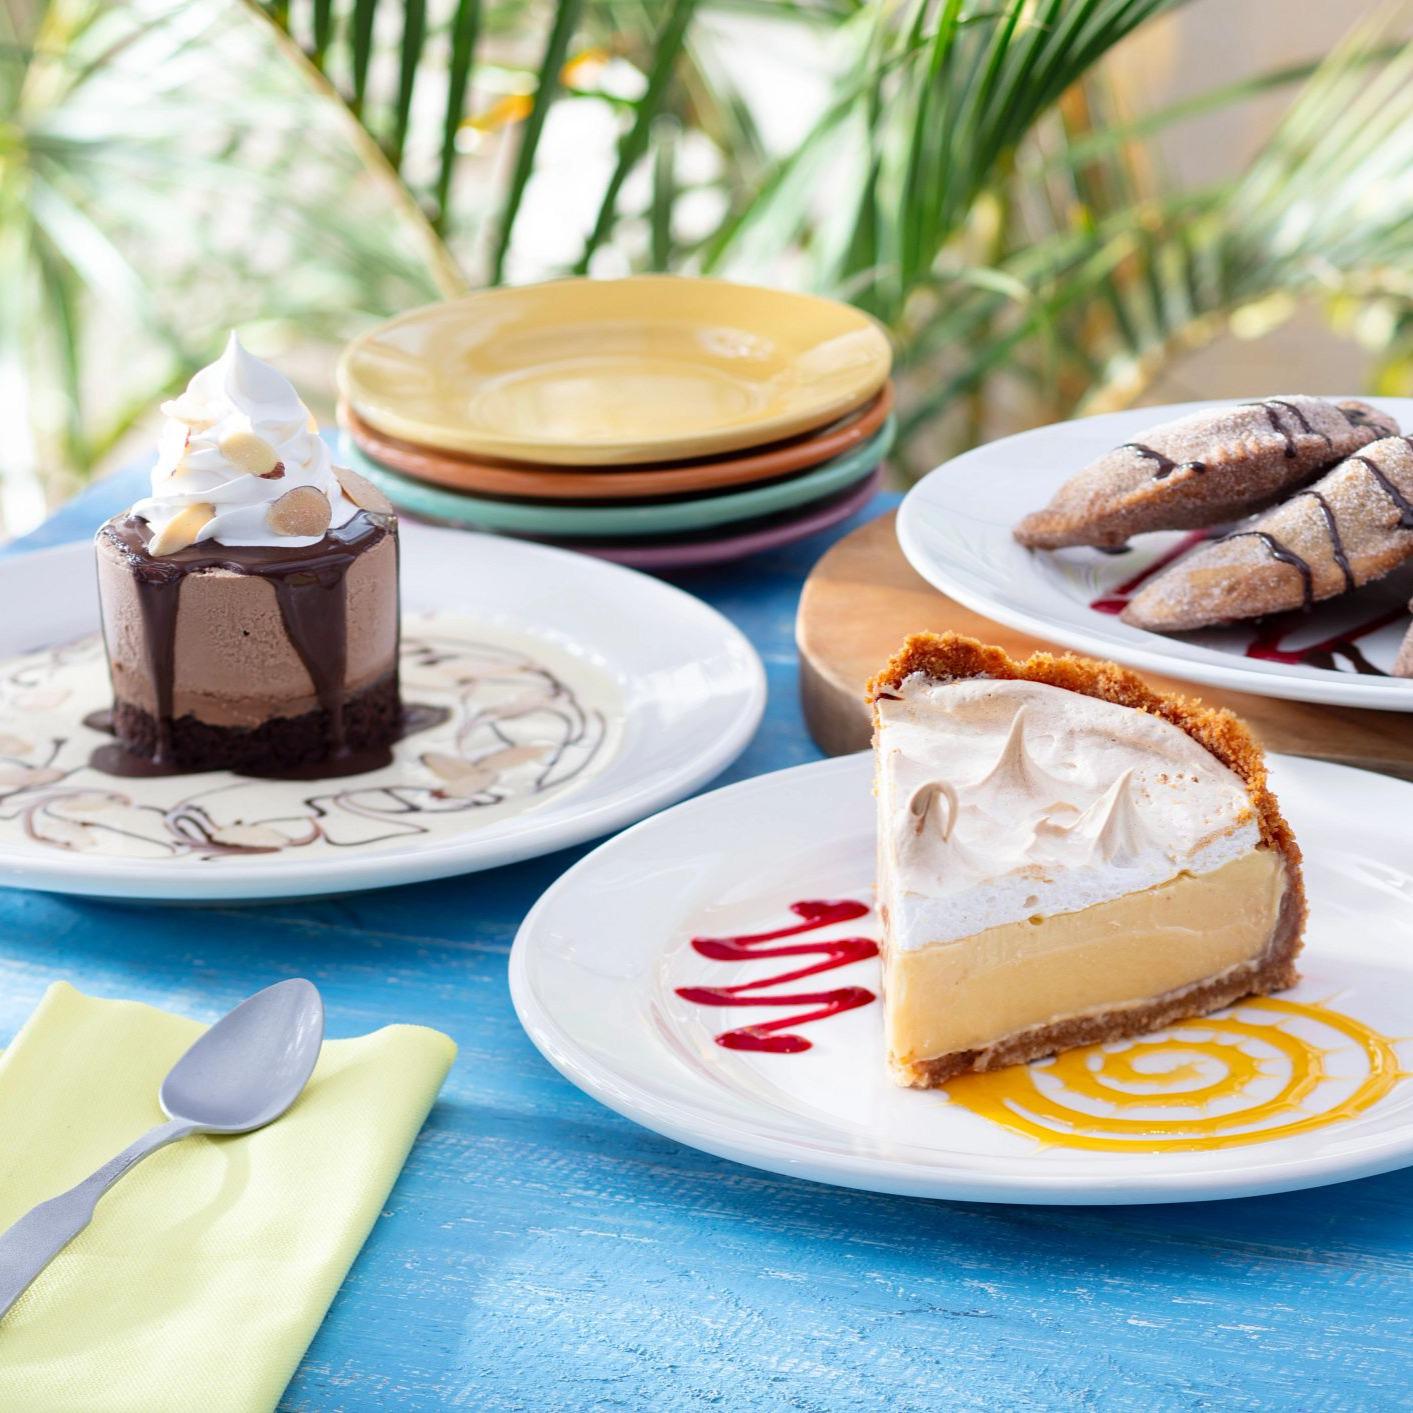 Choose from any of out sweet endings; Chocolate Island, Rebecca’s Key Lime Pie and Pineapple Cheesecake Empanadas.